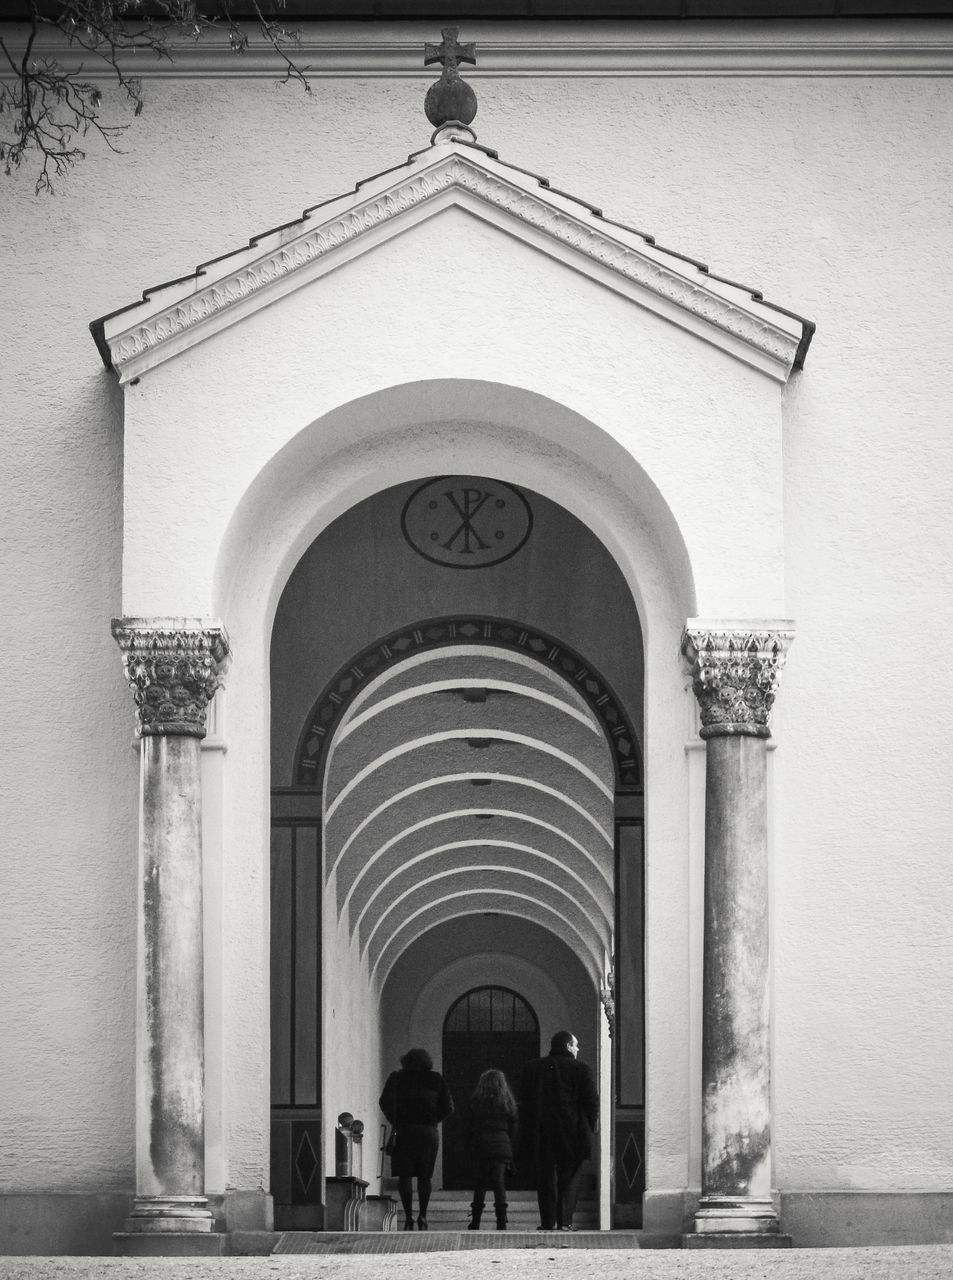 ARCHWAY OF BUILDING